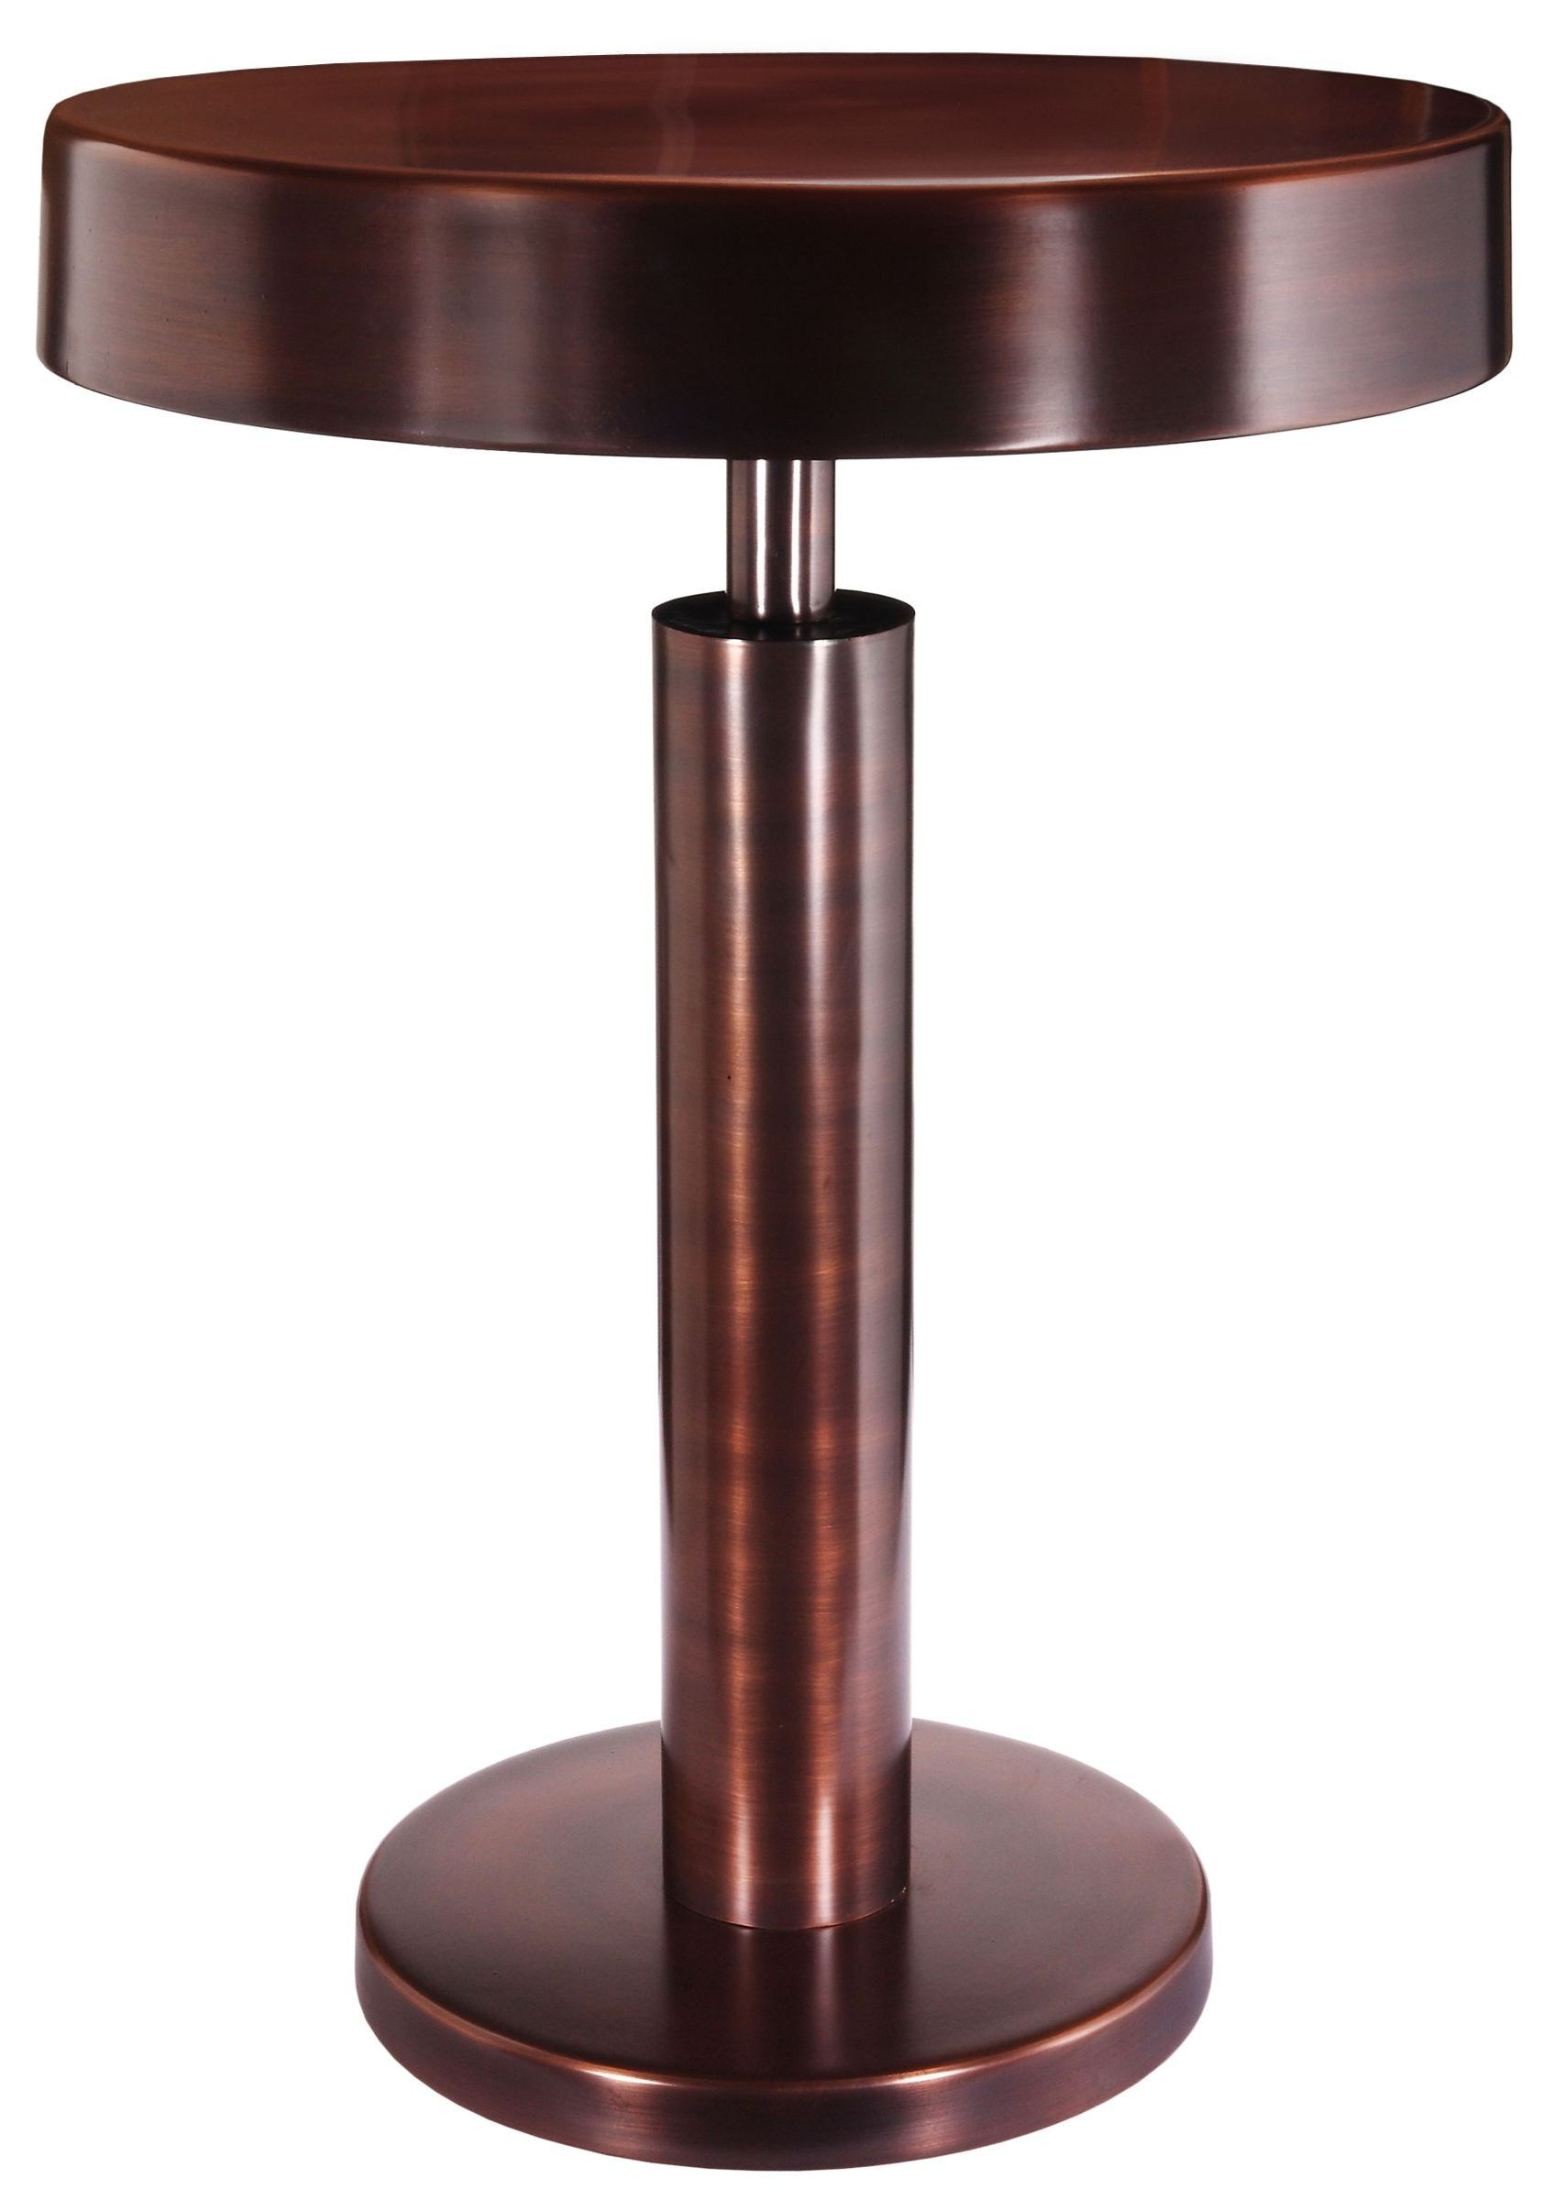 altair copper antique accent table kenroy home cherry drum chesterfield sofa feet lucite round dining half moon console cabinet nautical wall lights indoor side styles concrete